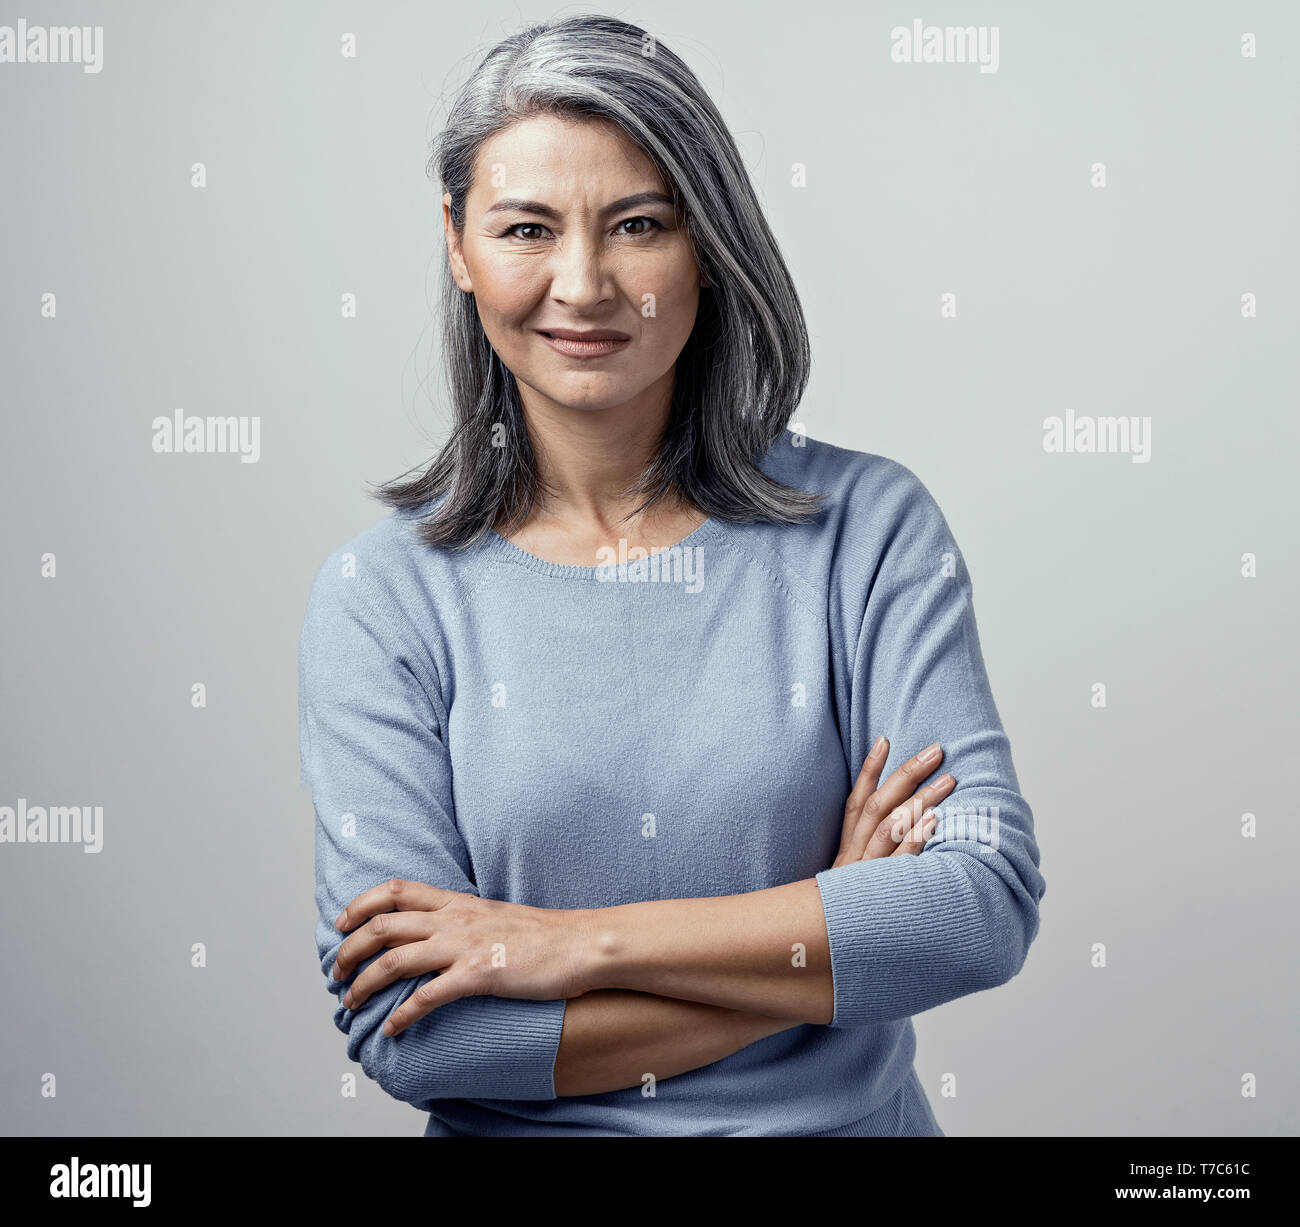 Attractive Elderly Female Model Posing Disgust and Dissatisfaction. Her Head Tilted and Hands Crossed. She has Middle-Length Grey Hair. Wears light-Bl Stock Photo